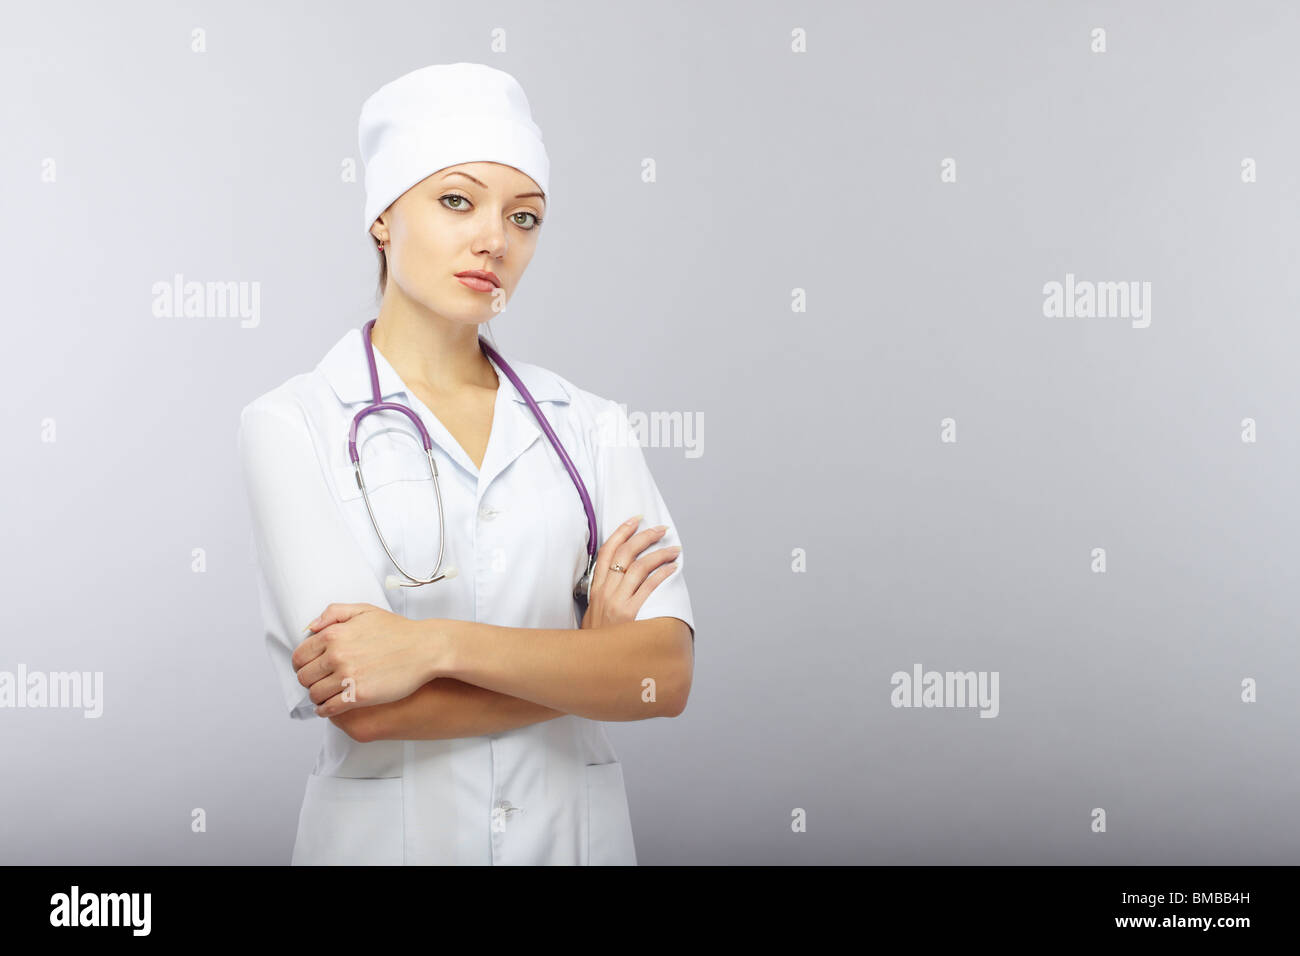 Cross-armed doctor with stethoscope on a gray background. Healthcare theme Stock Photo